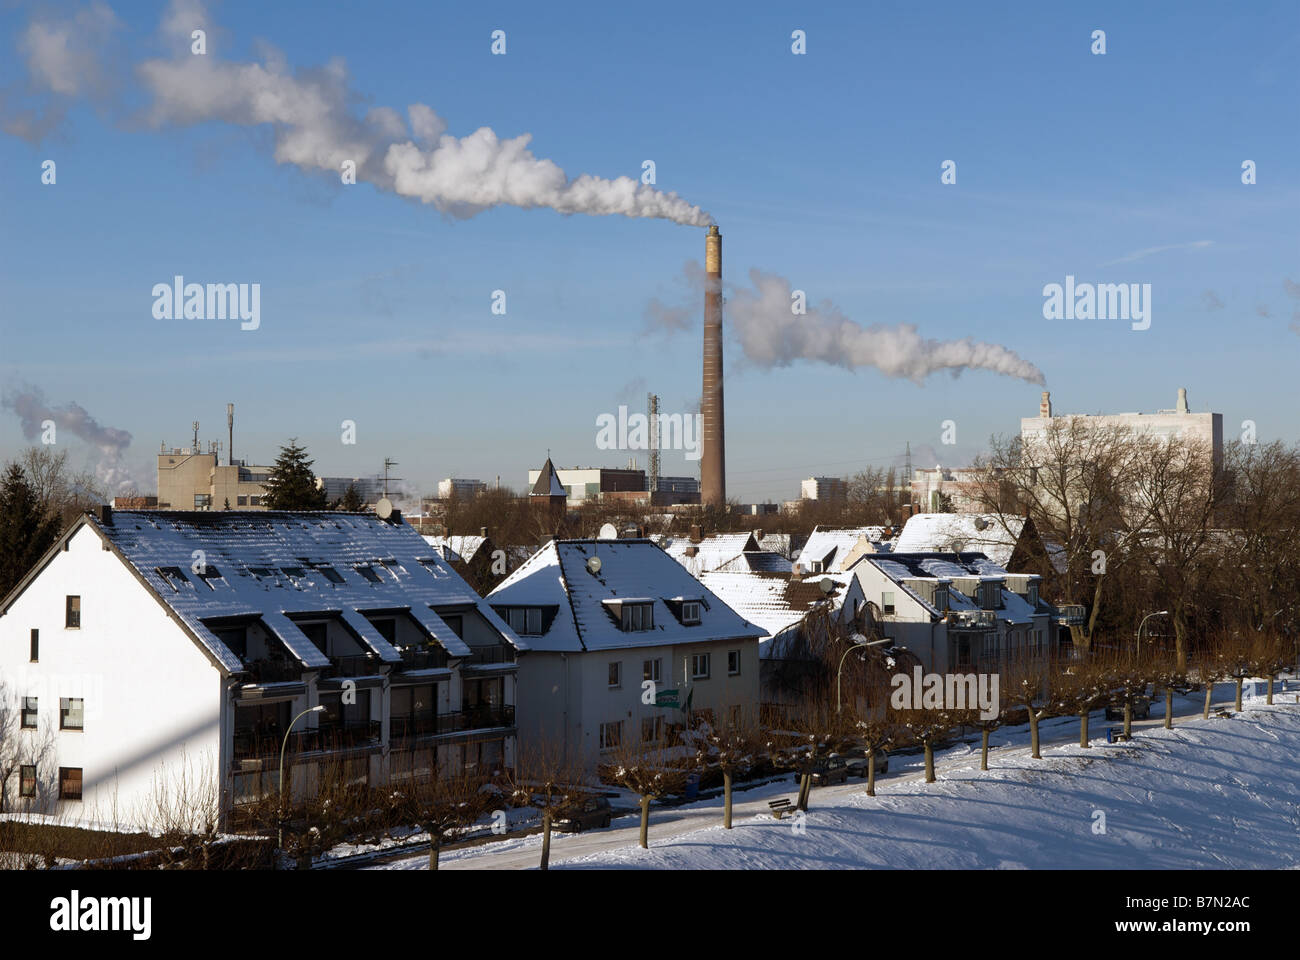 Residential properties close to chemical plant, Germany. Stock Photo